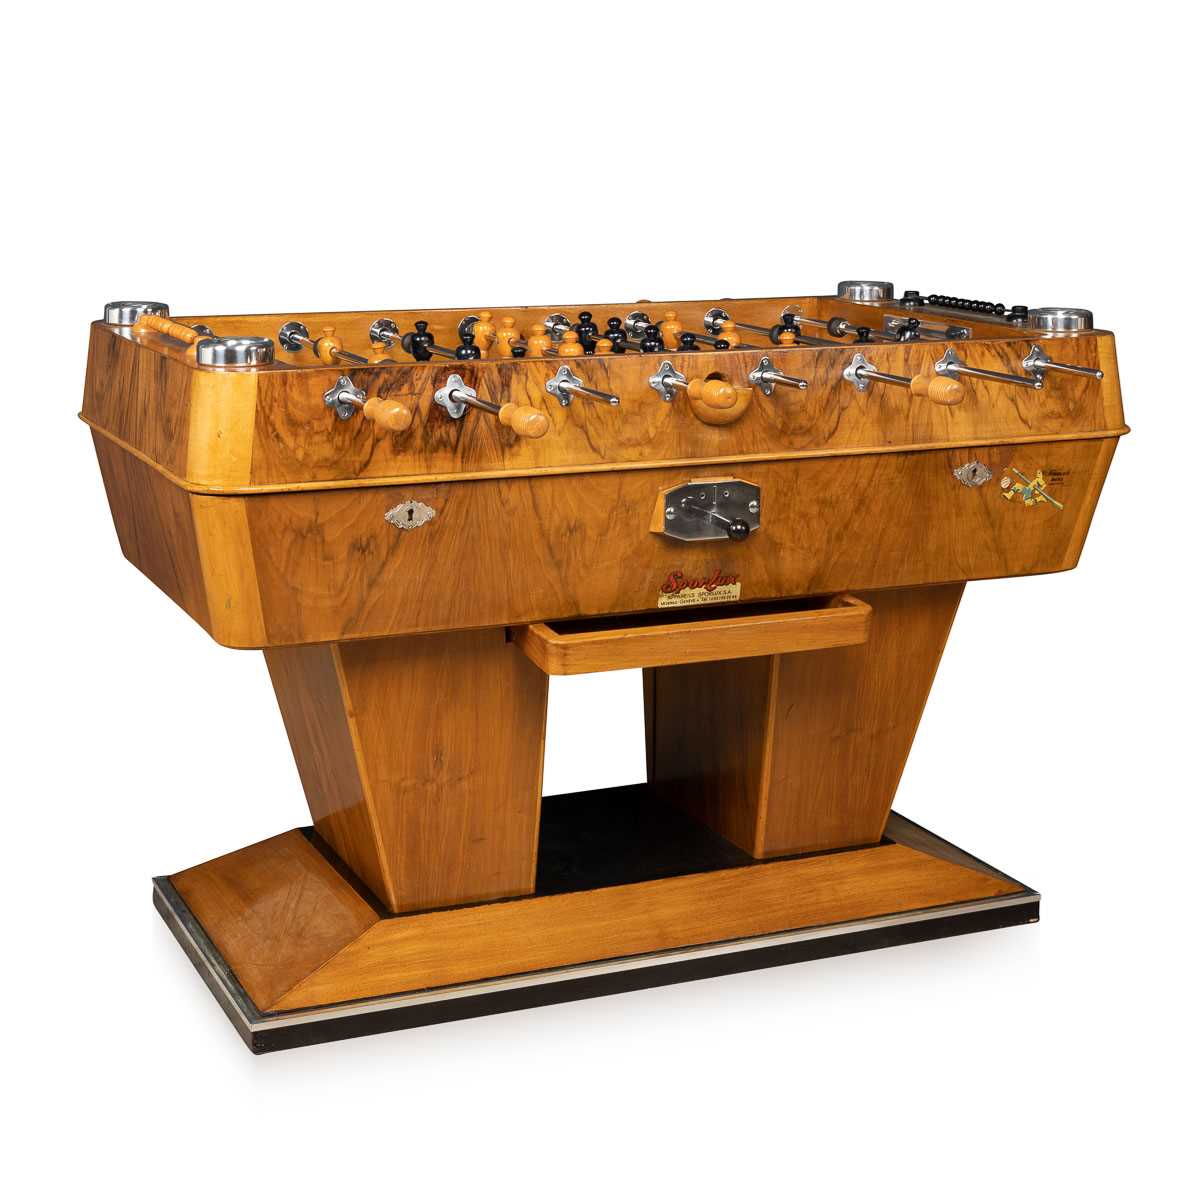 A MID 20TH CENTURY SWISS ART DECO STYLE FOOTBALL TABLE GAME